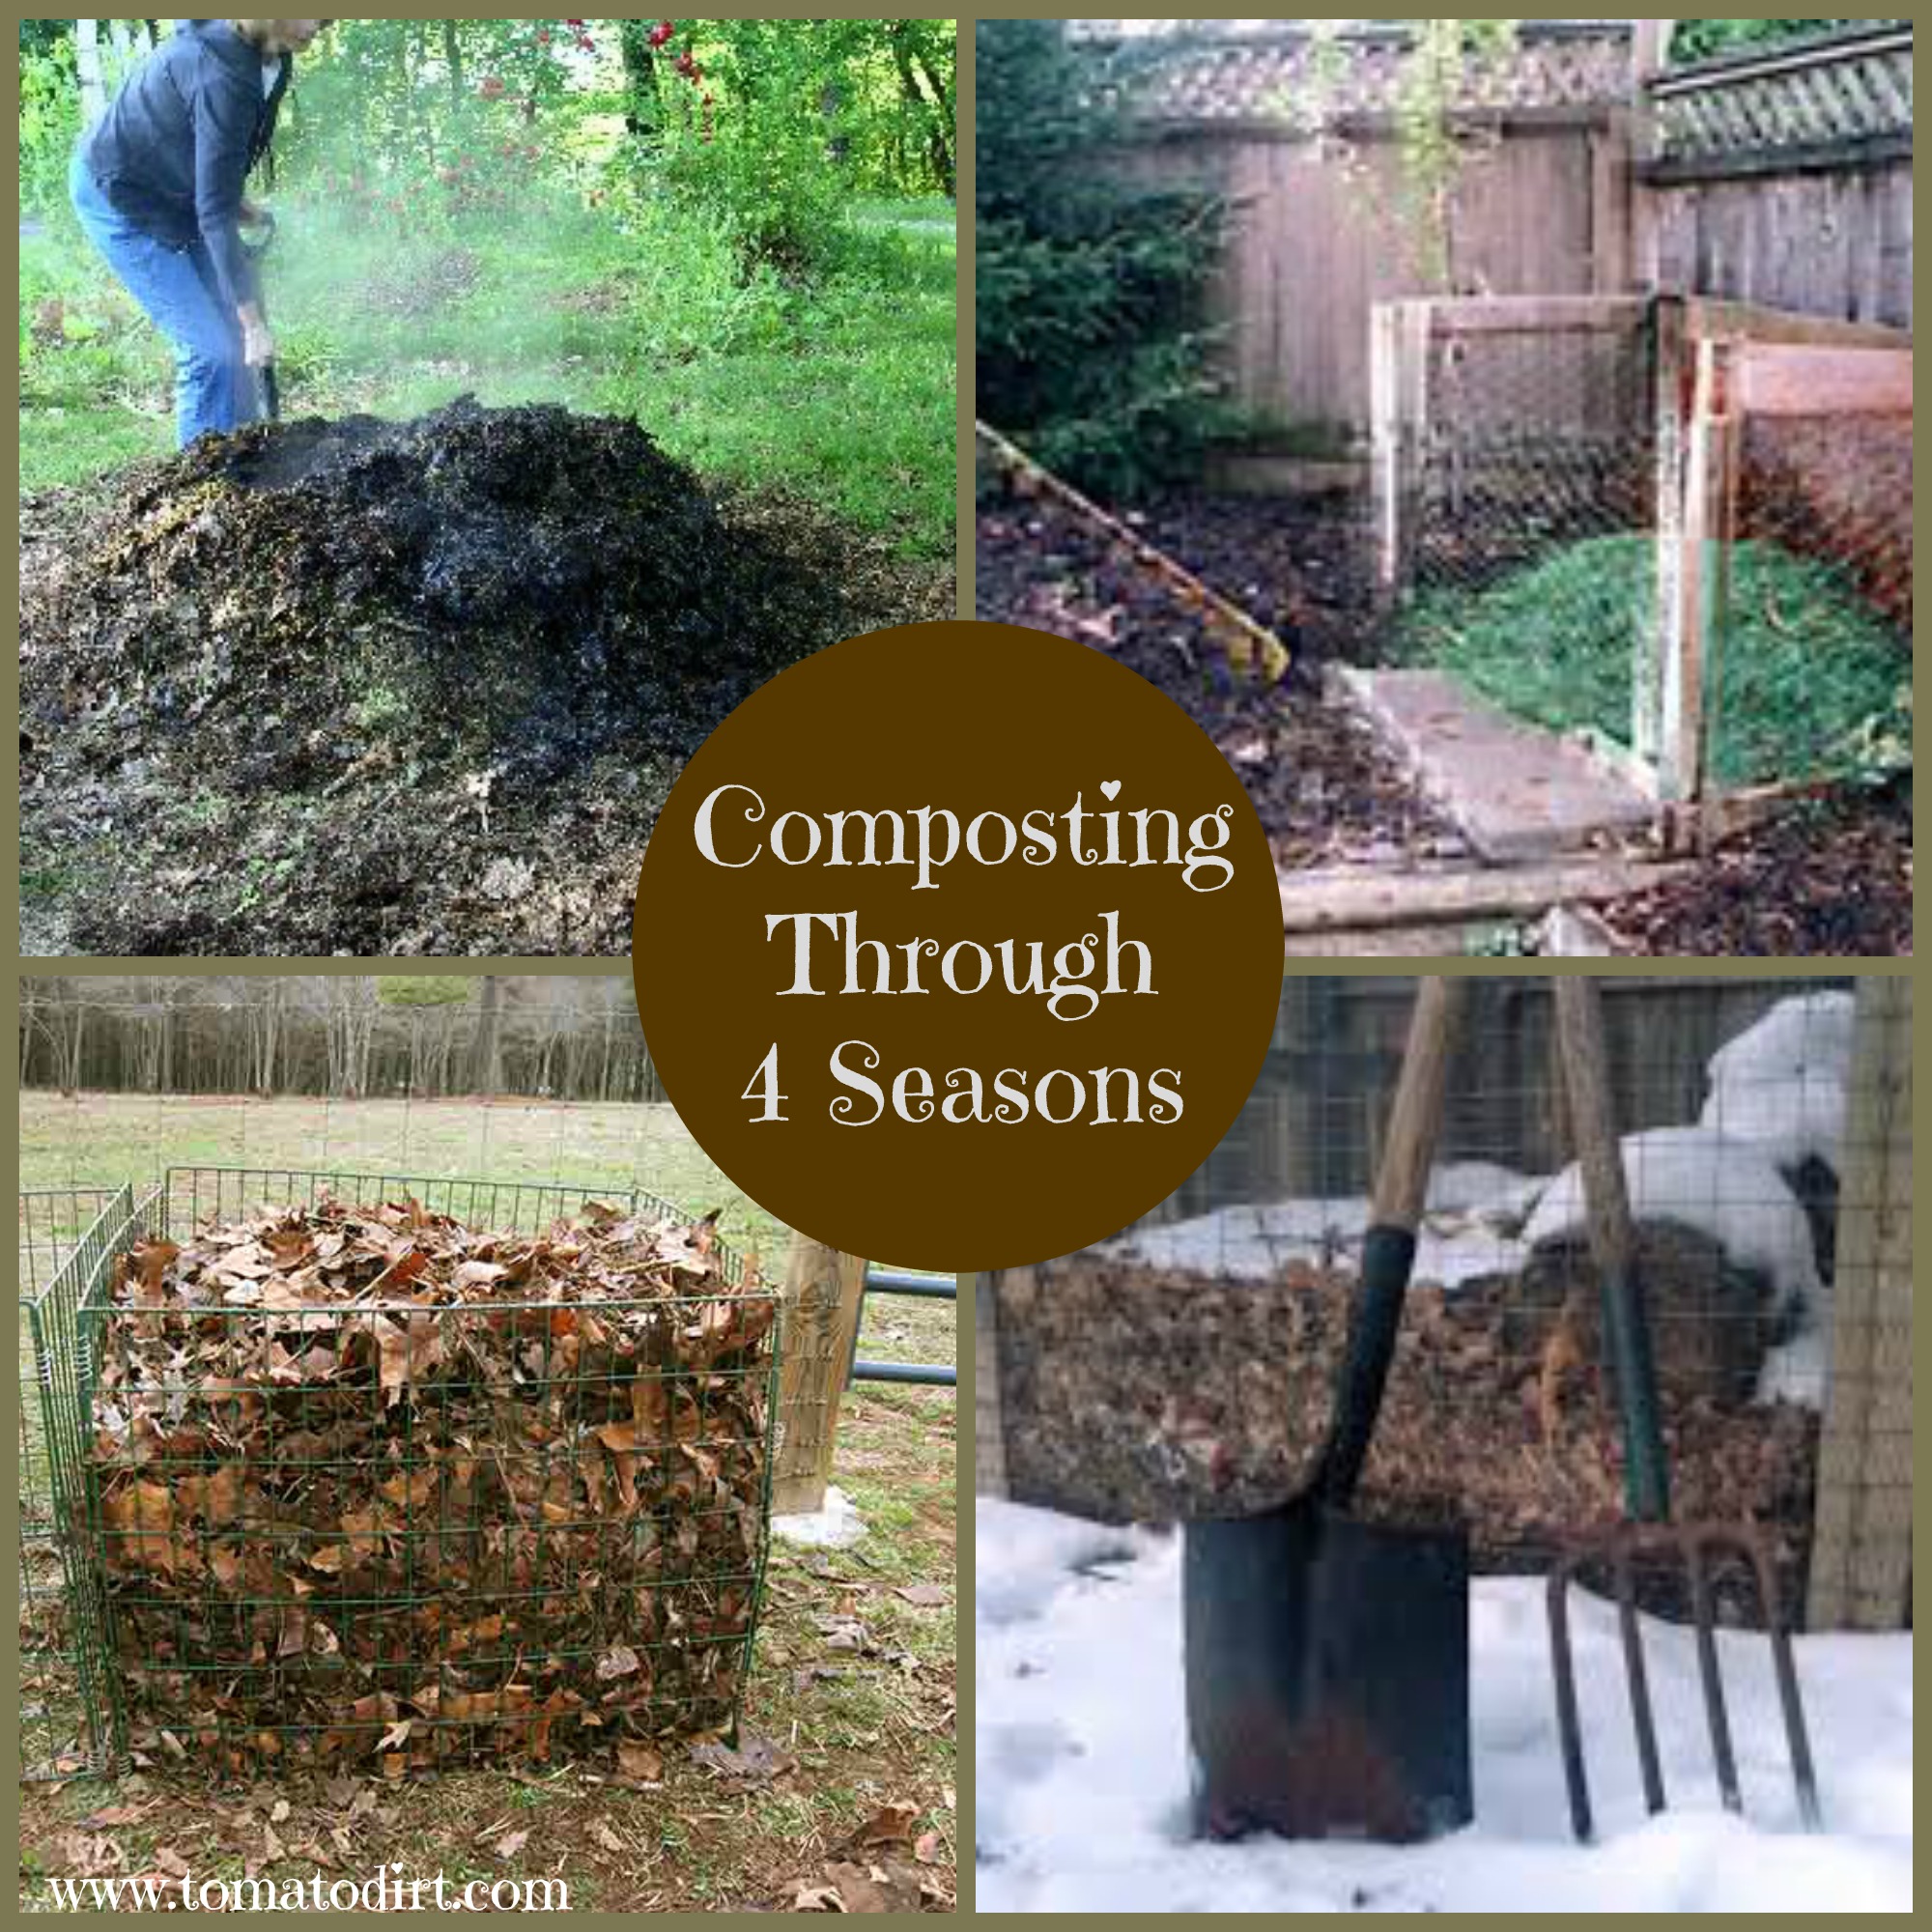 Composting through 4 seasons with Tomato Dirt